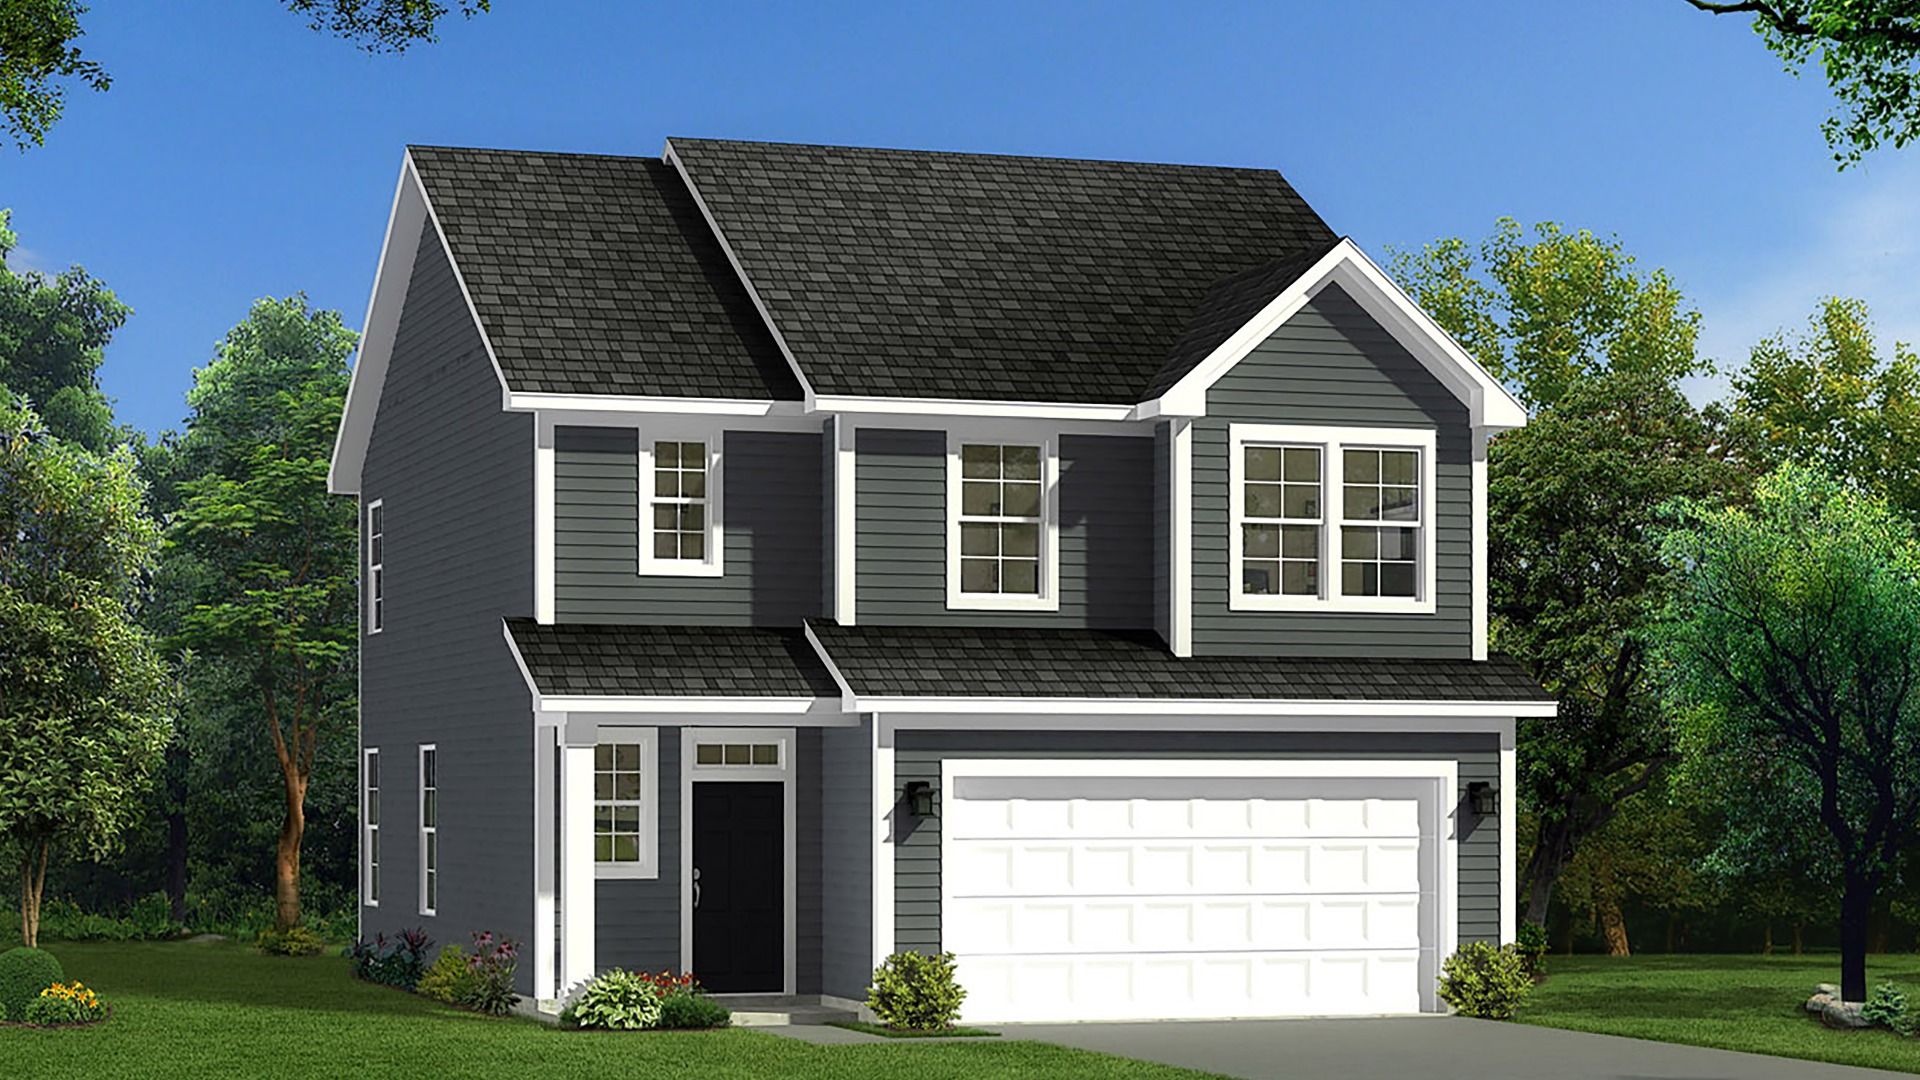 Bordeaux Exterior:*Please reach out to community sales consultant in regards to exterior elevations.*